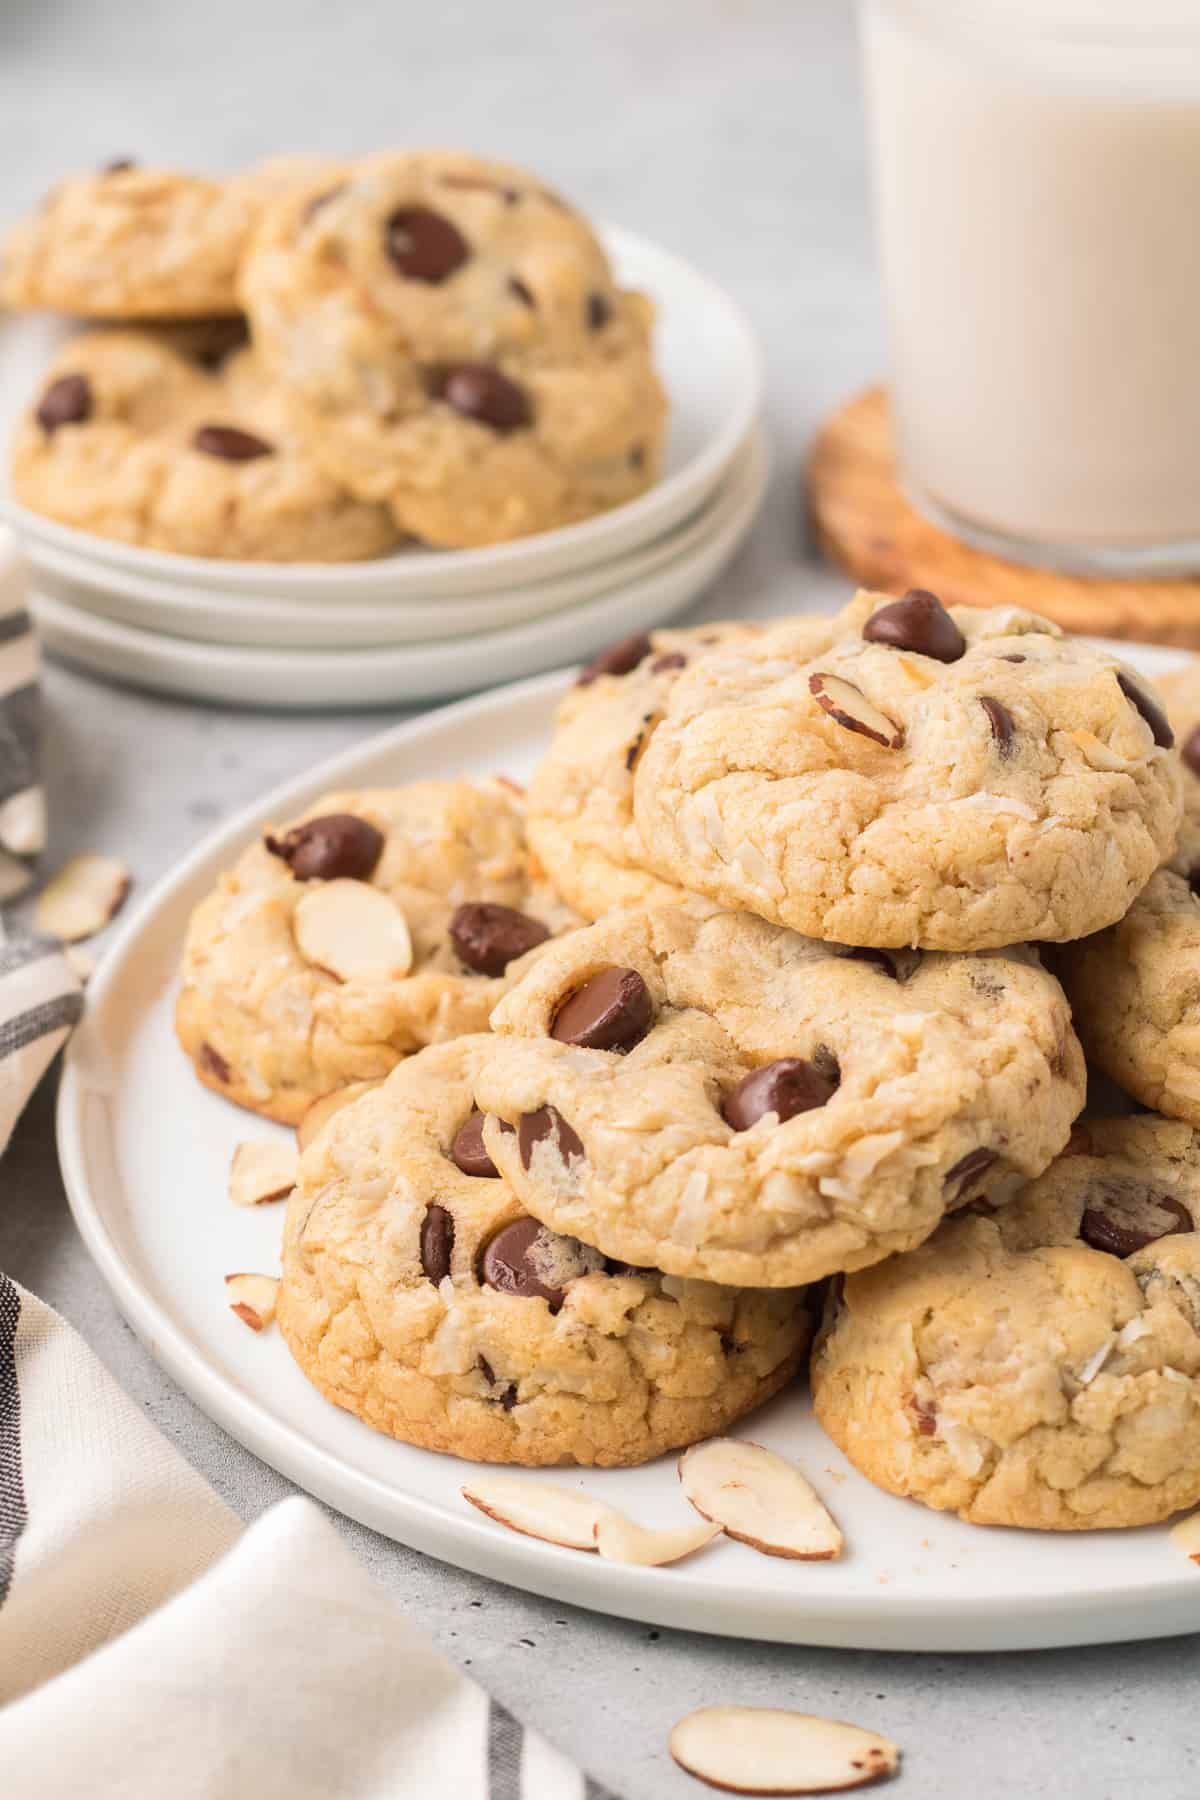 A pile of Almond Joy Cookies on a white plate with smaller plate and glass of milk in the background.